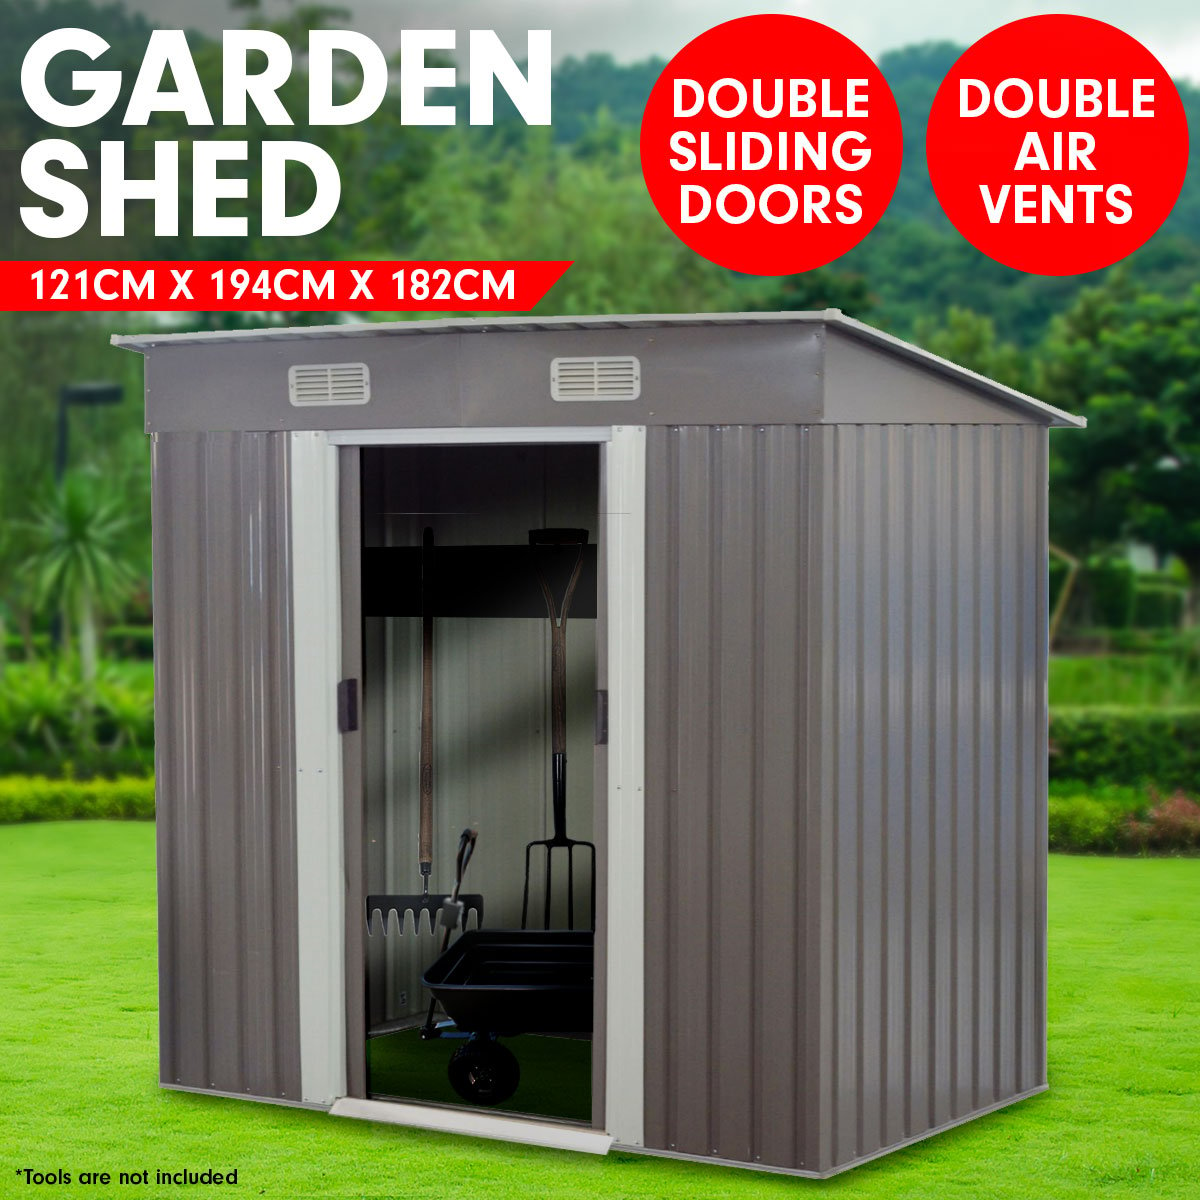 Garden Shed Flat 4ft x 6ft Outdoor Storage Shelter - Grey 2